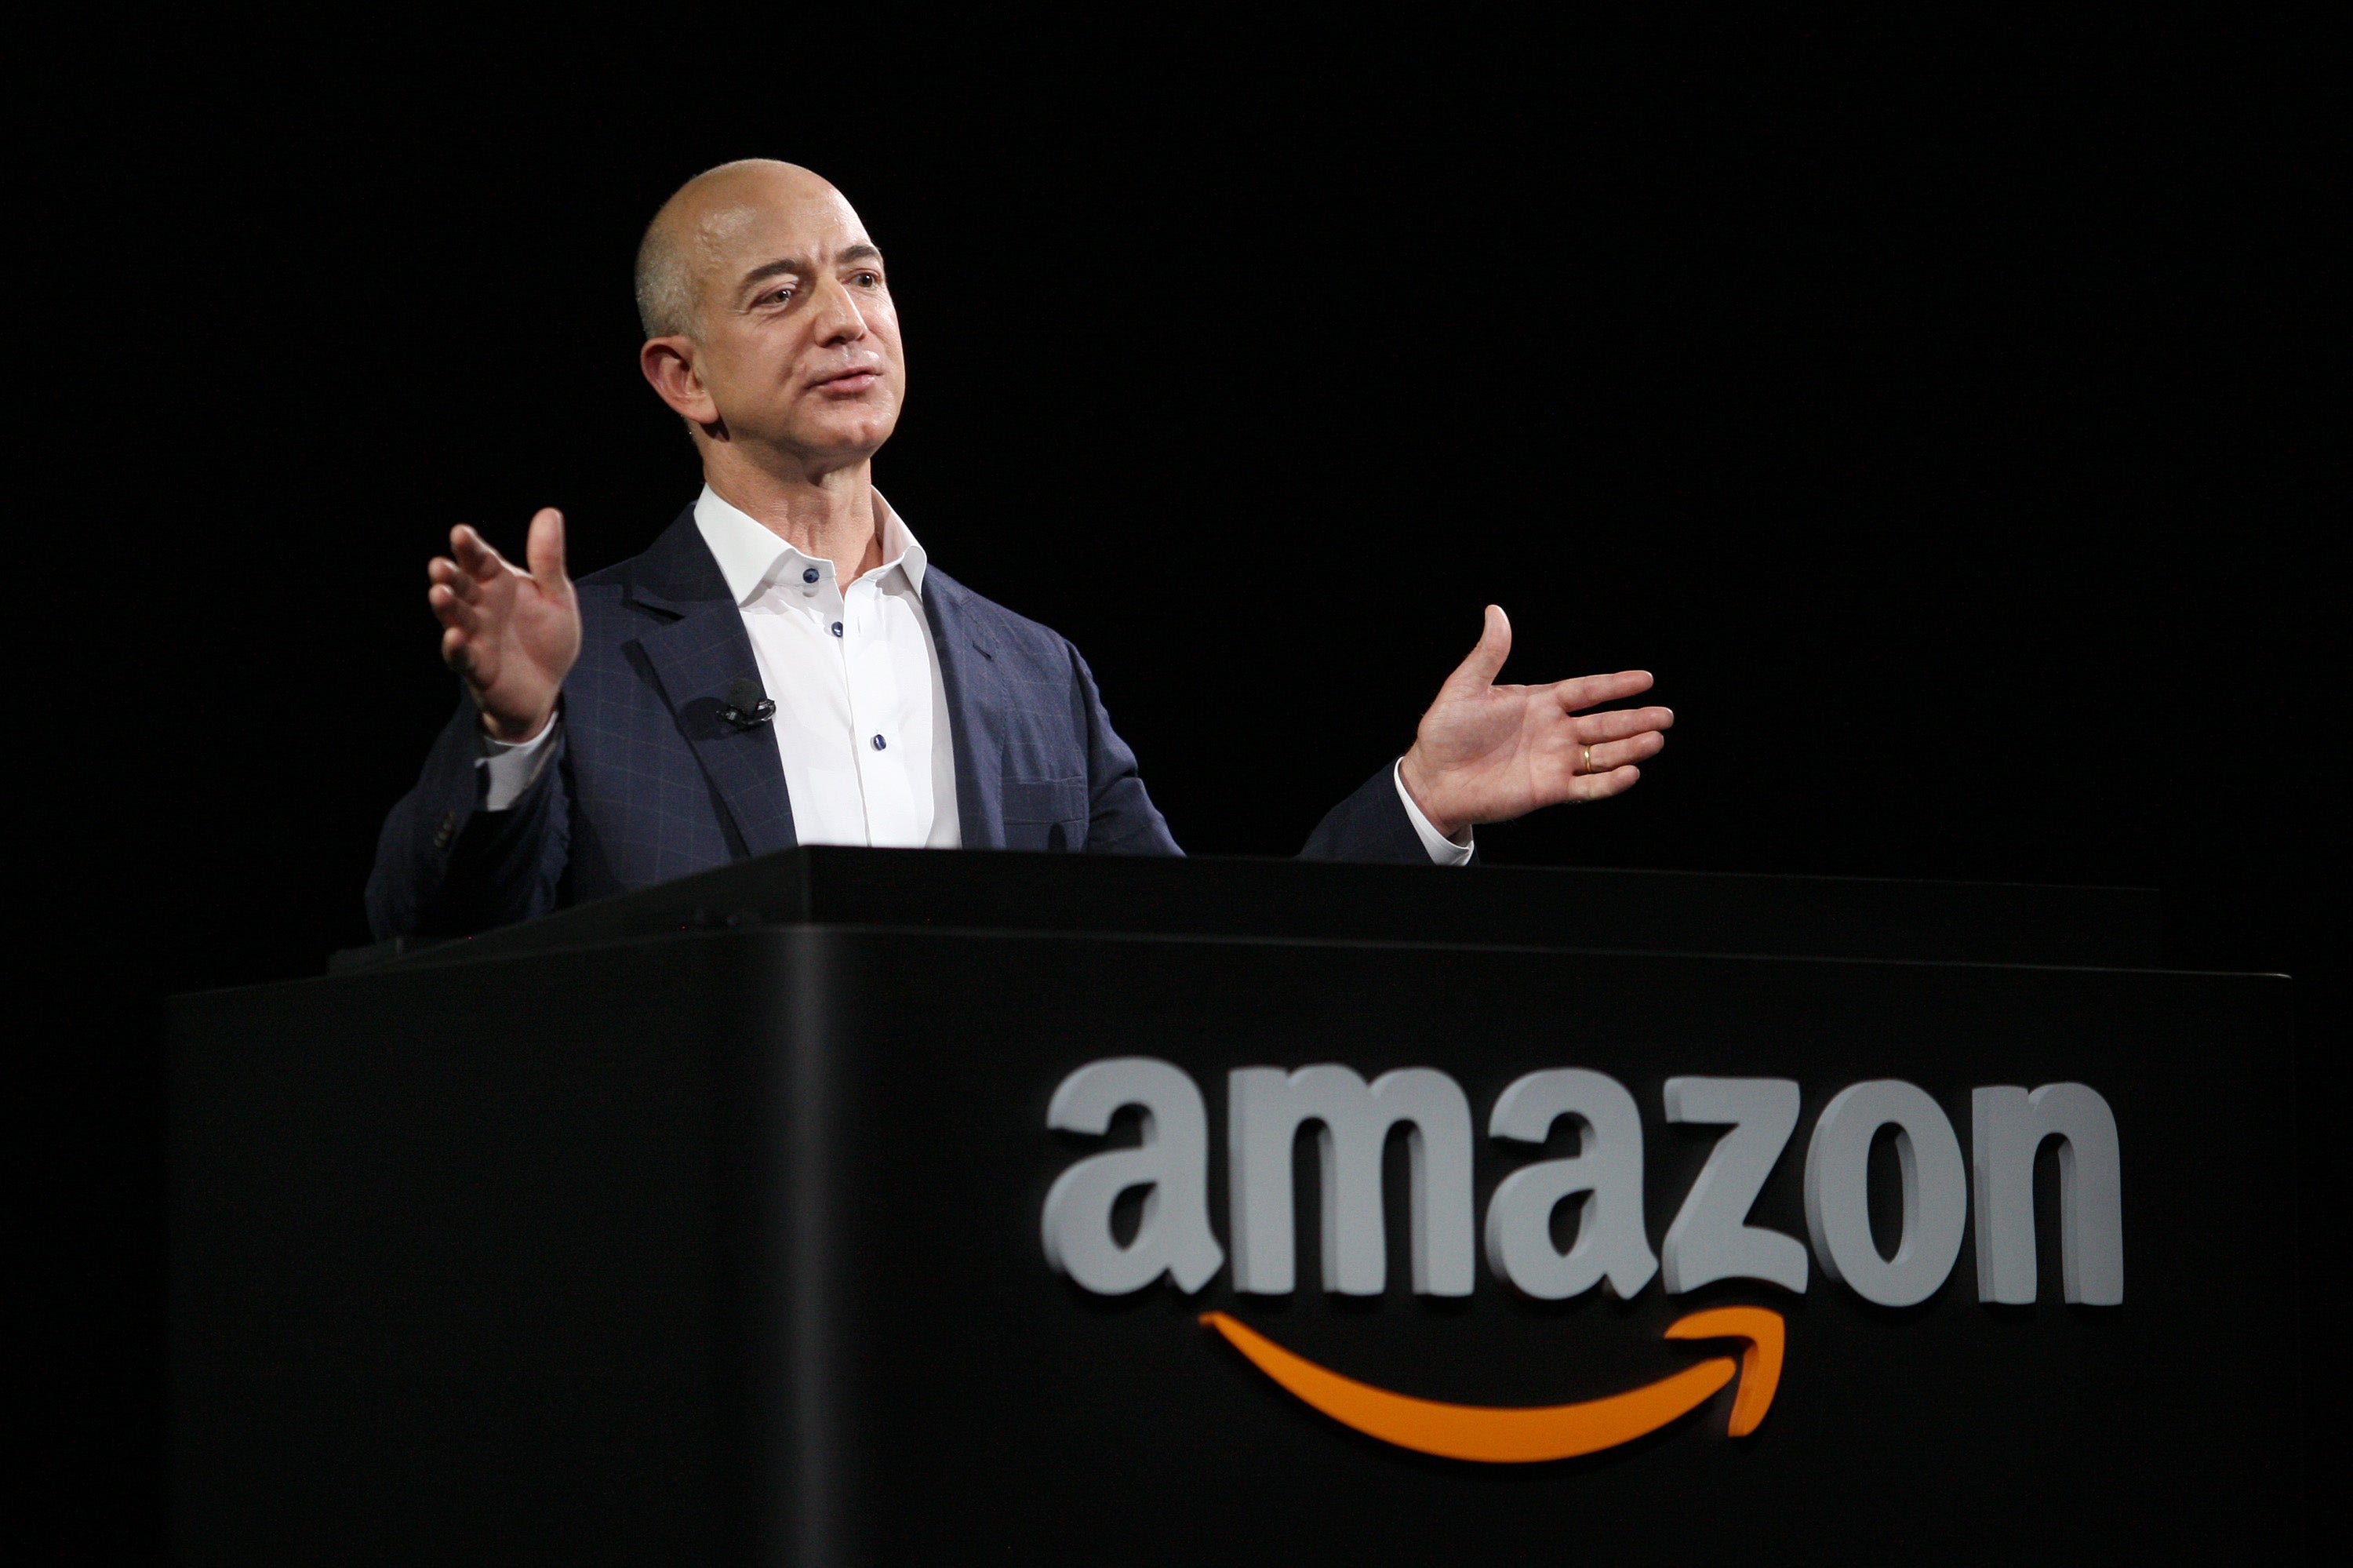 Mr Bezos still owns a large chunk of Amazon whose shares have surged by around 50 per cent